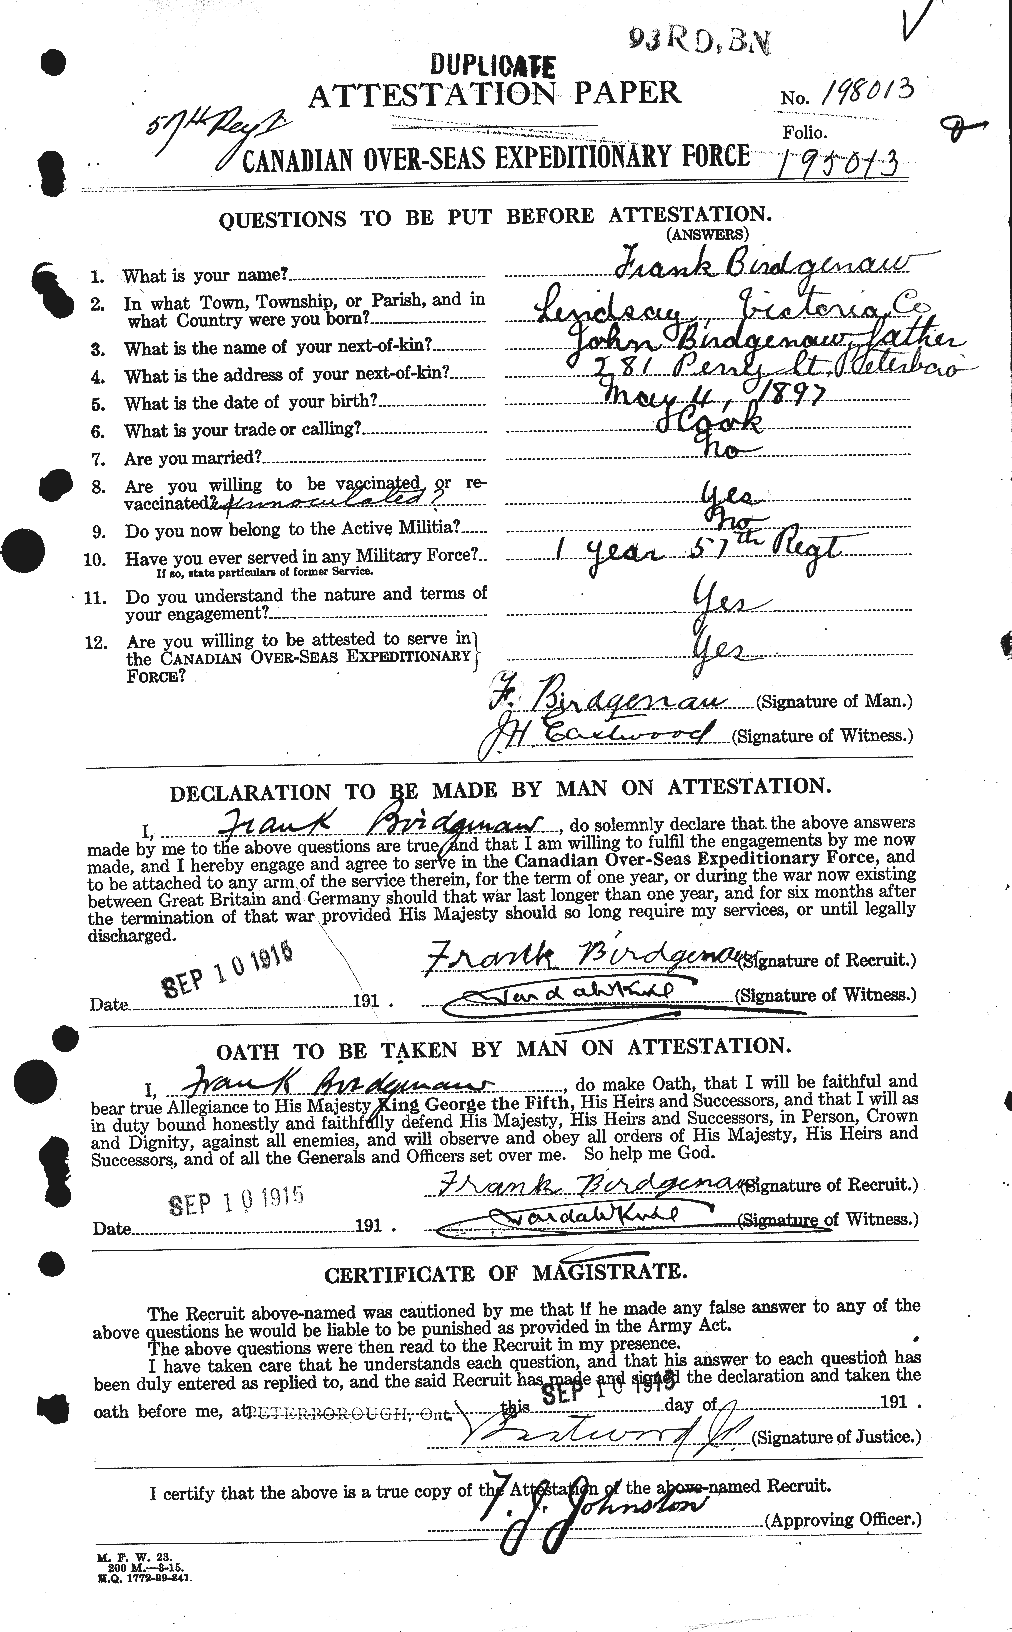 Personnel Records of the First World War - CEF 243815a